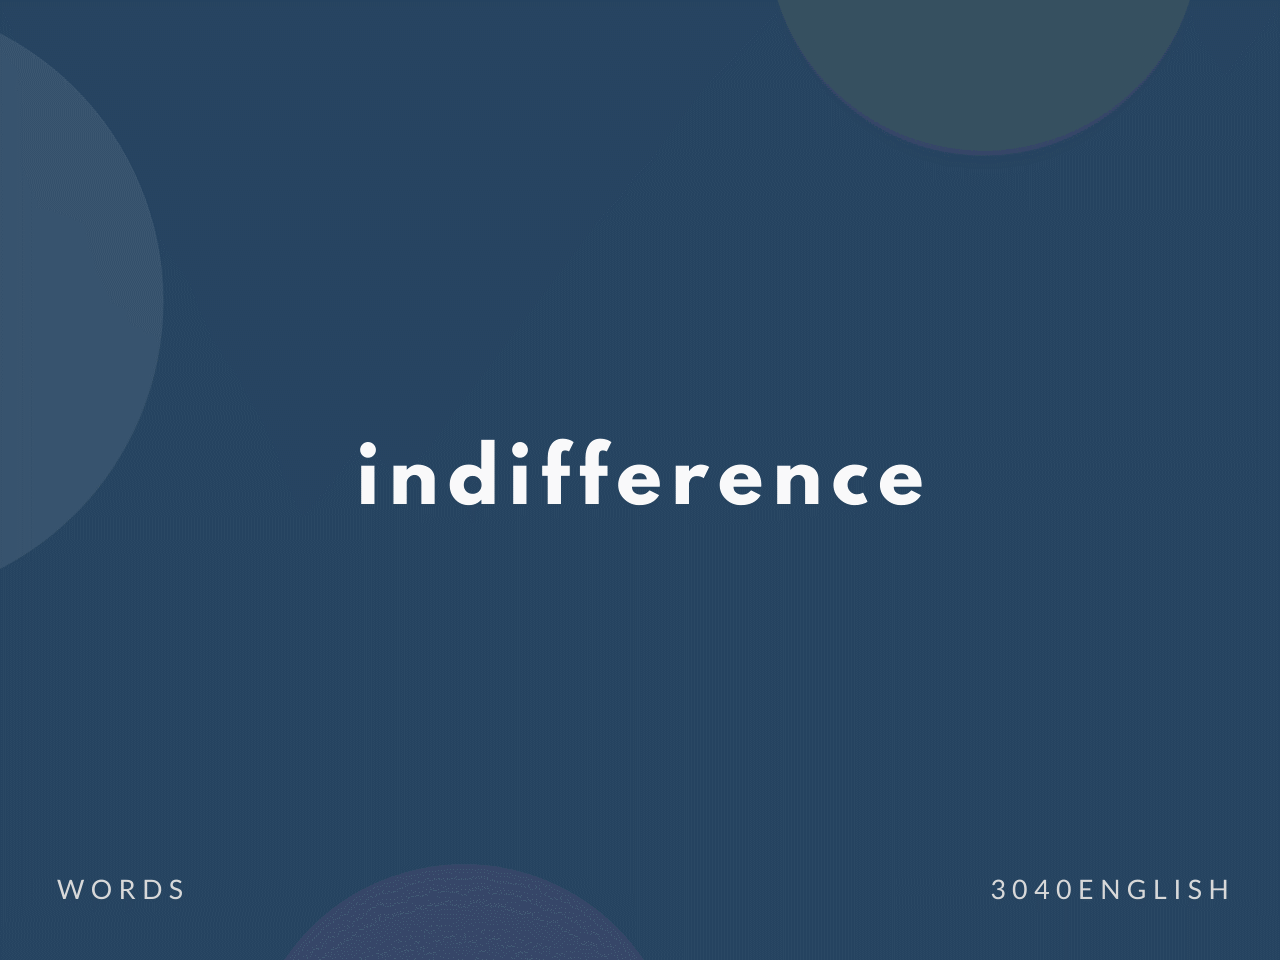 indifference の意味と簡単な使い方【音読用例文あり】